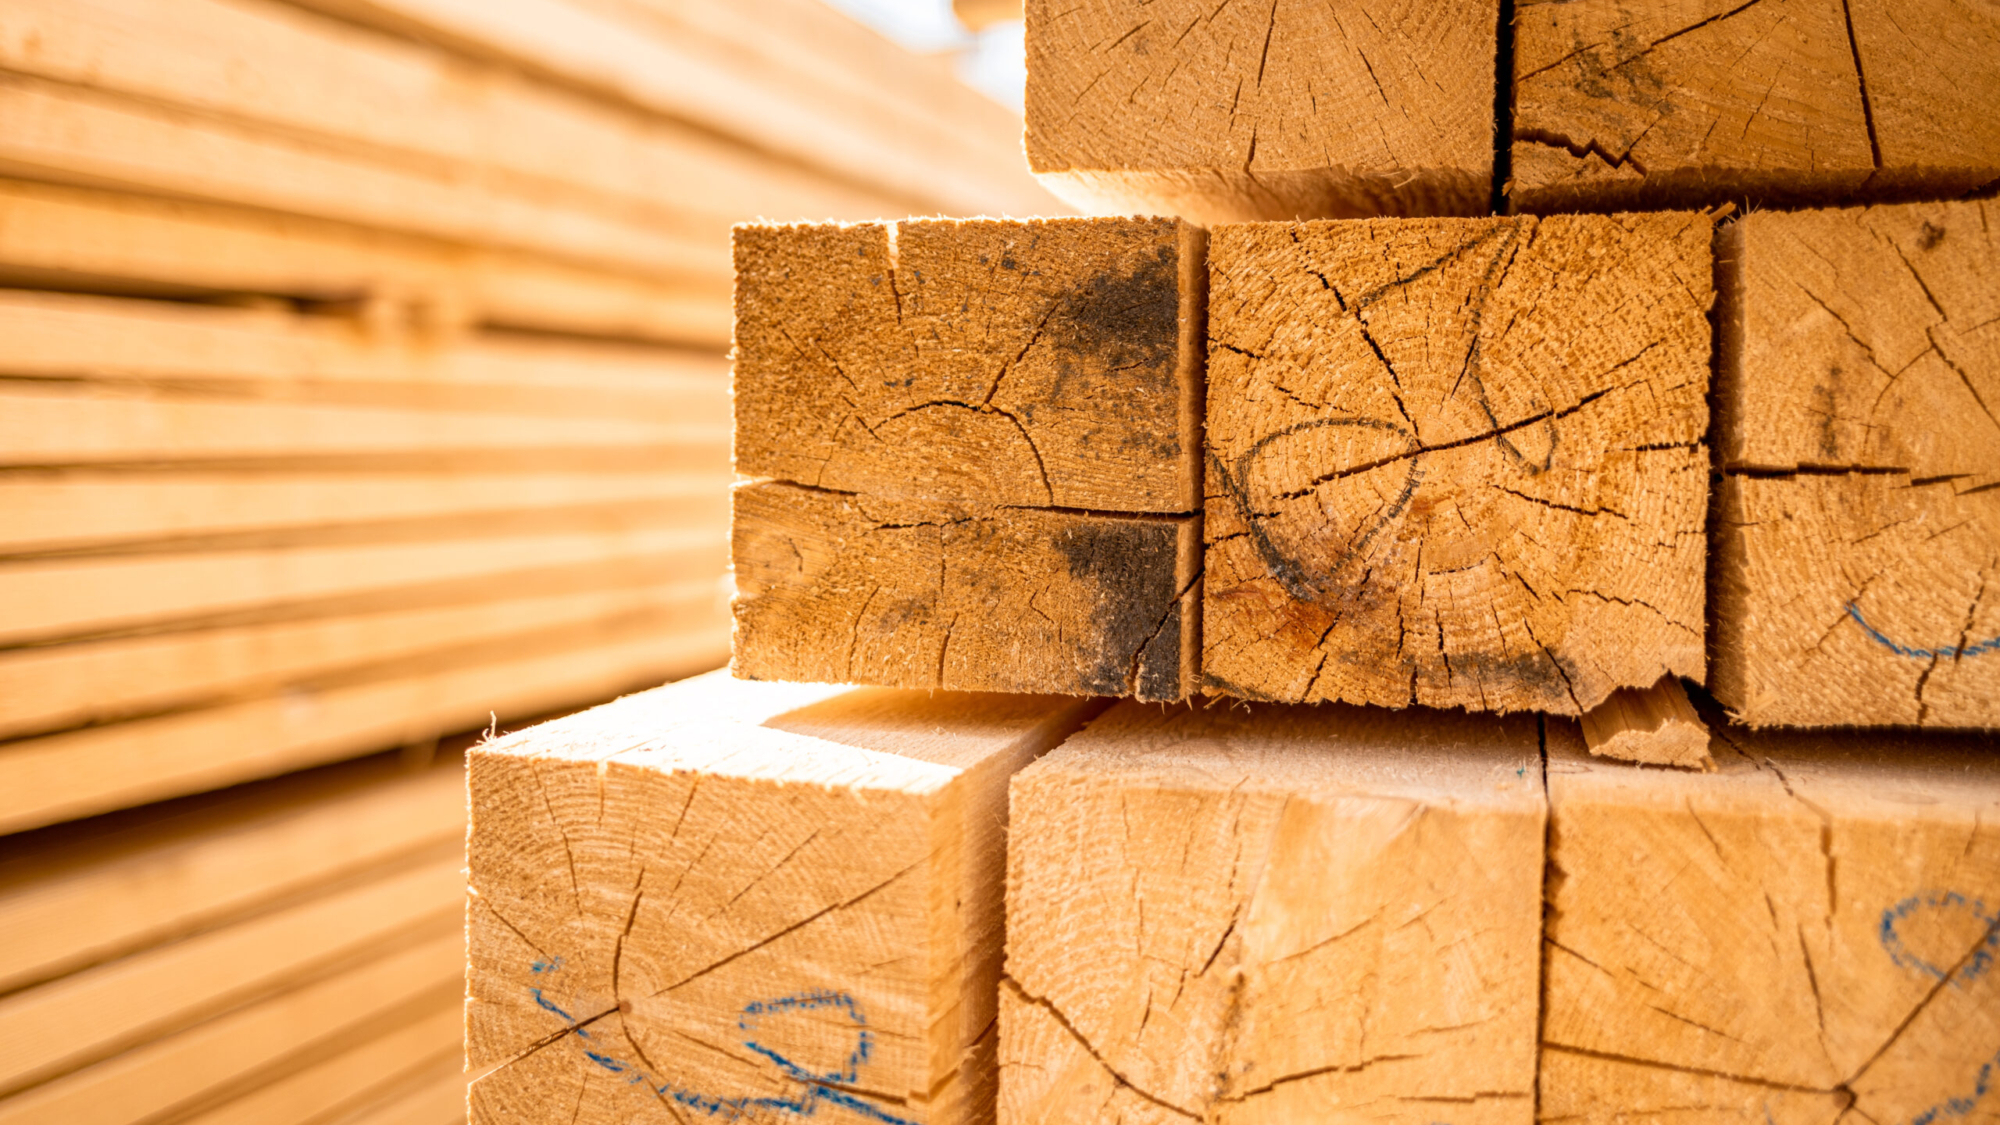 Looking for a reliable lumber yard near you? Discover how Gott Marketing can help you find the perfect lumber yard that meets your needs. Partner with us for all your marketing solutions in the construction industry.